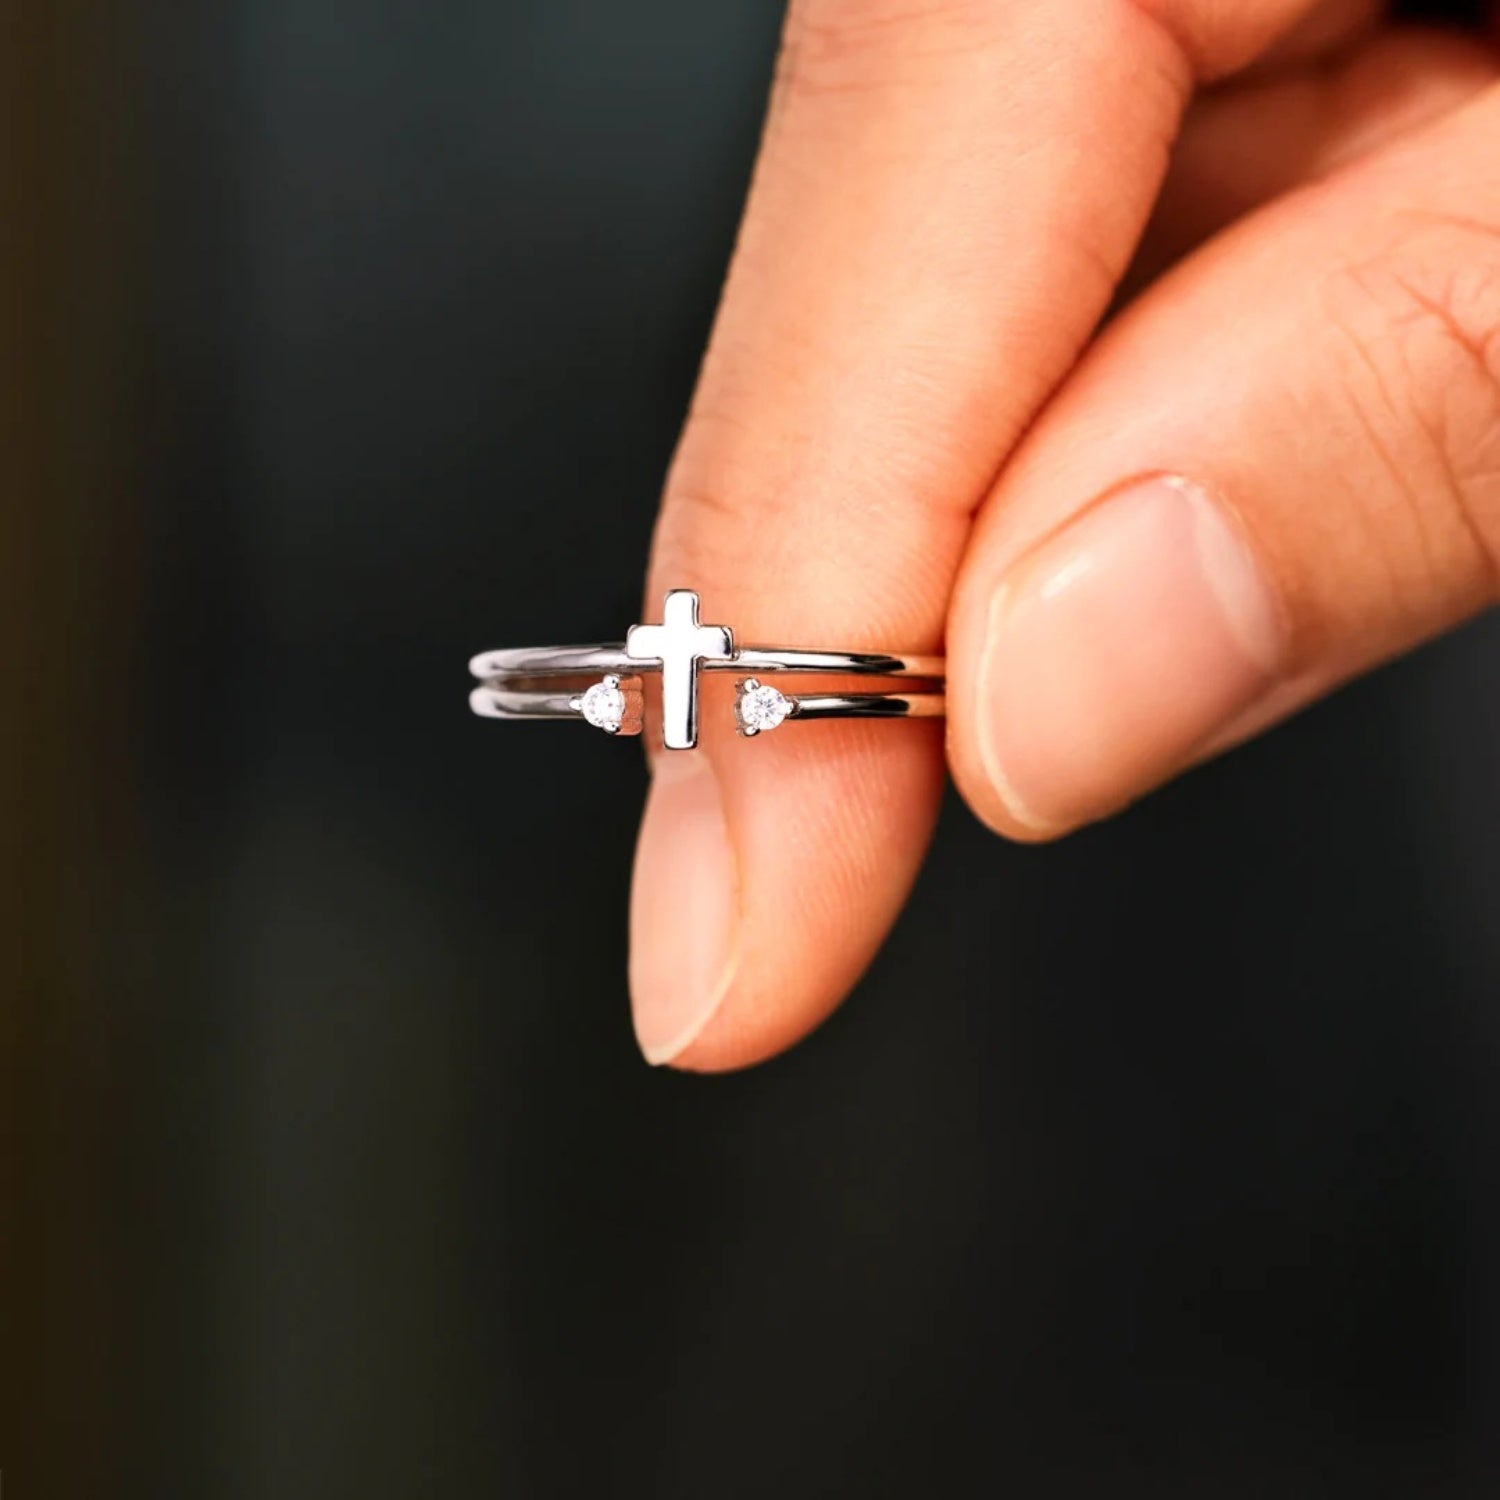 925 Sterling Silver Cross Ring - Tophatter Shopping Deals - Electronics, Jewelry, Beauty, Health, Gadgets, Fashion